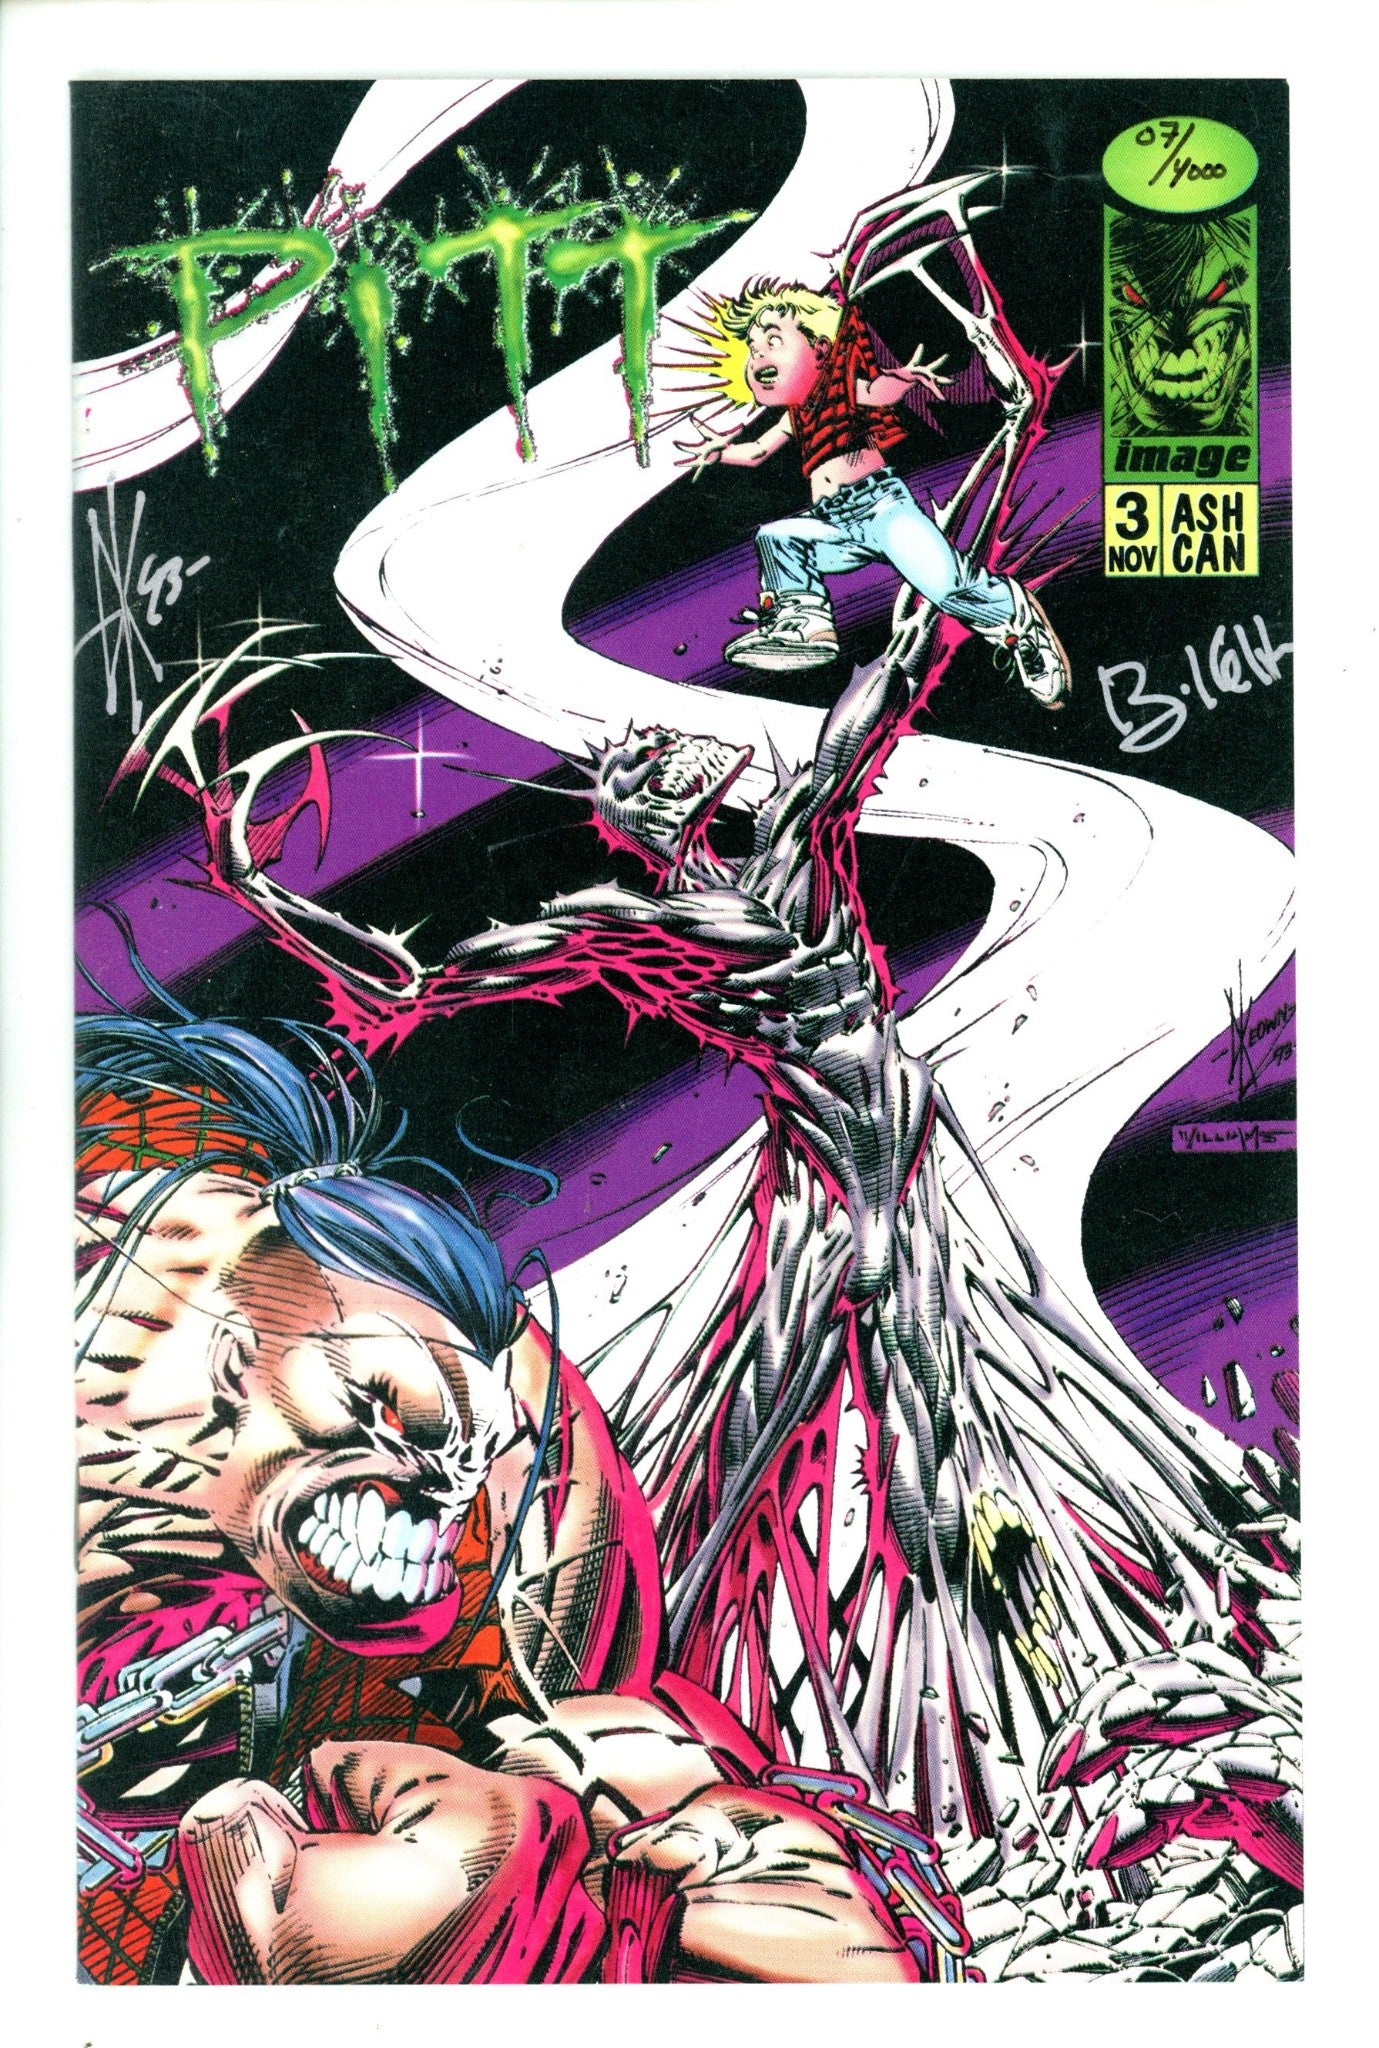 Pitt Deluxe Ashcan 3 NM- (9.2) (1993) Signed x2 Cover Dale Keown & Brian Hotton 